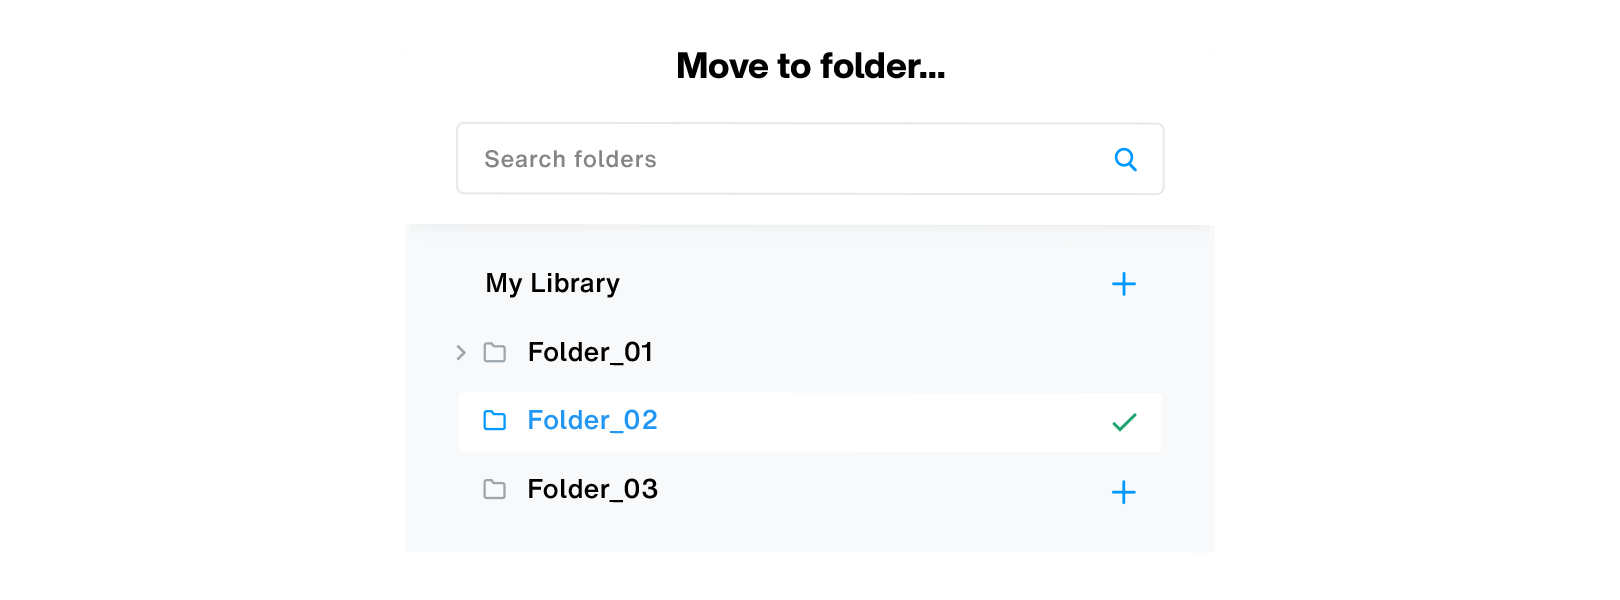 Move to folder part 01